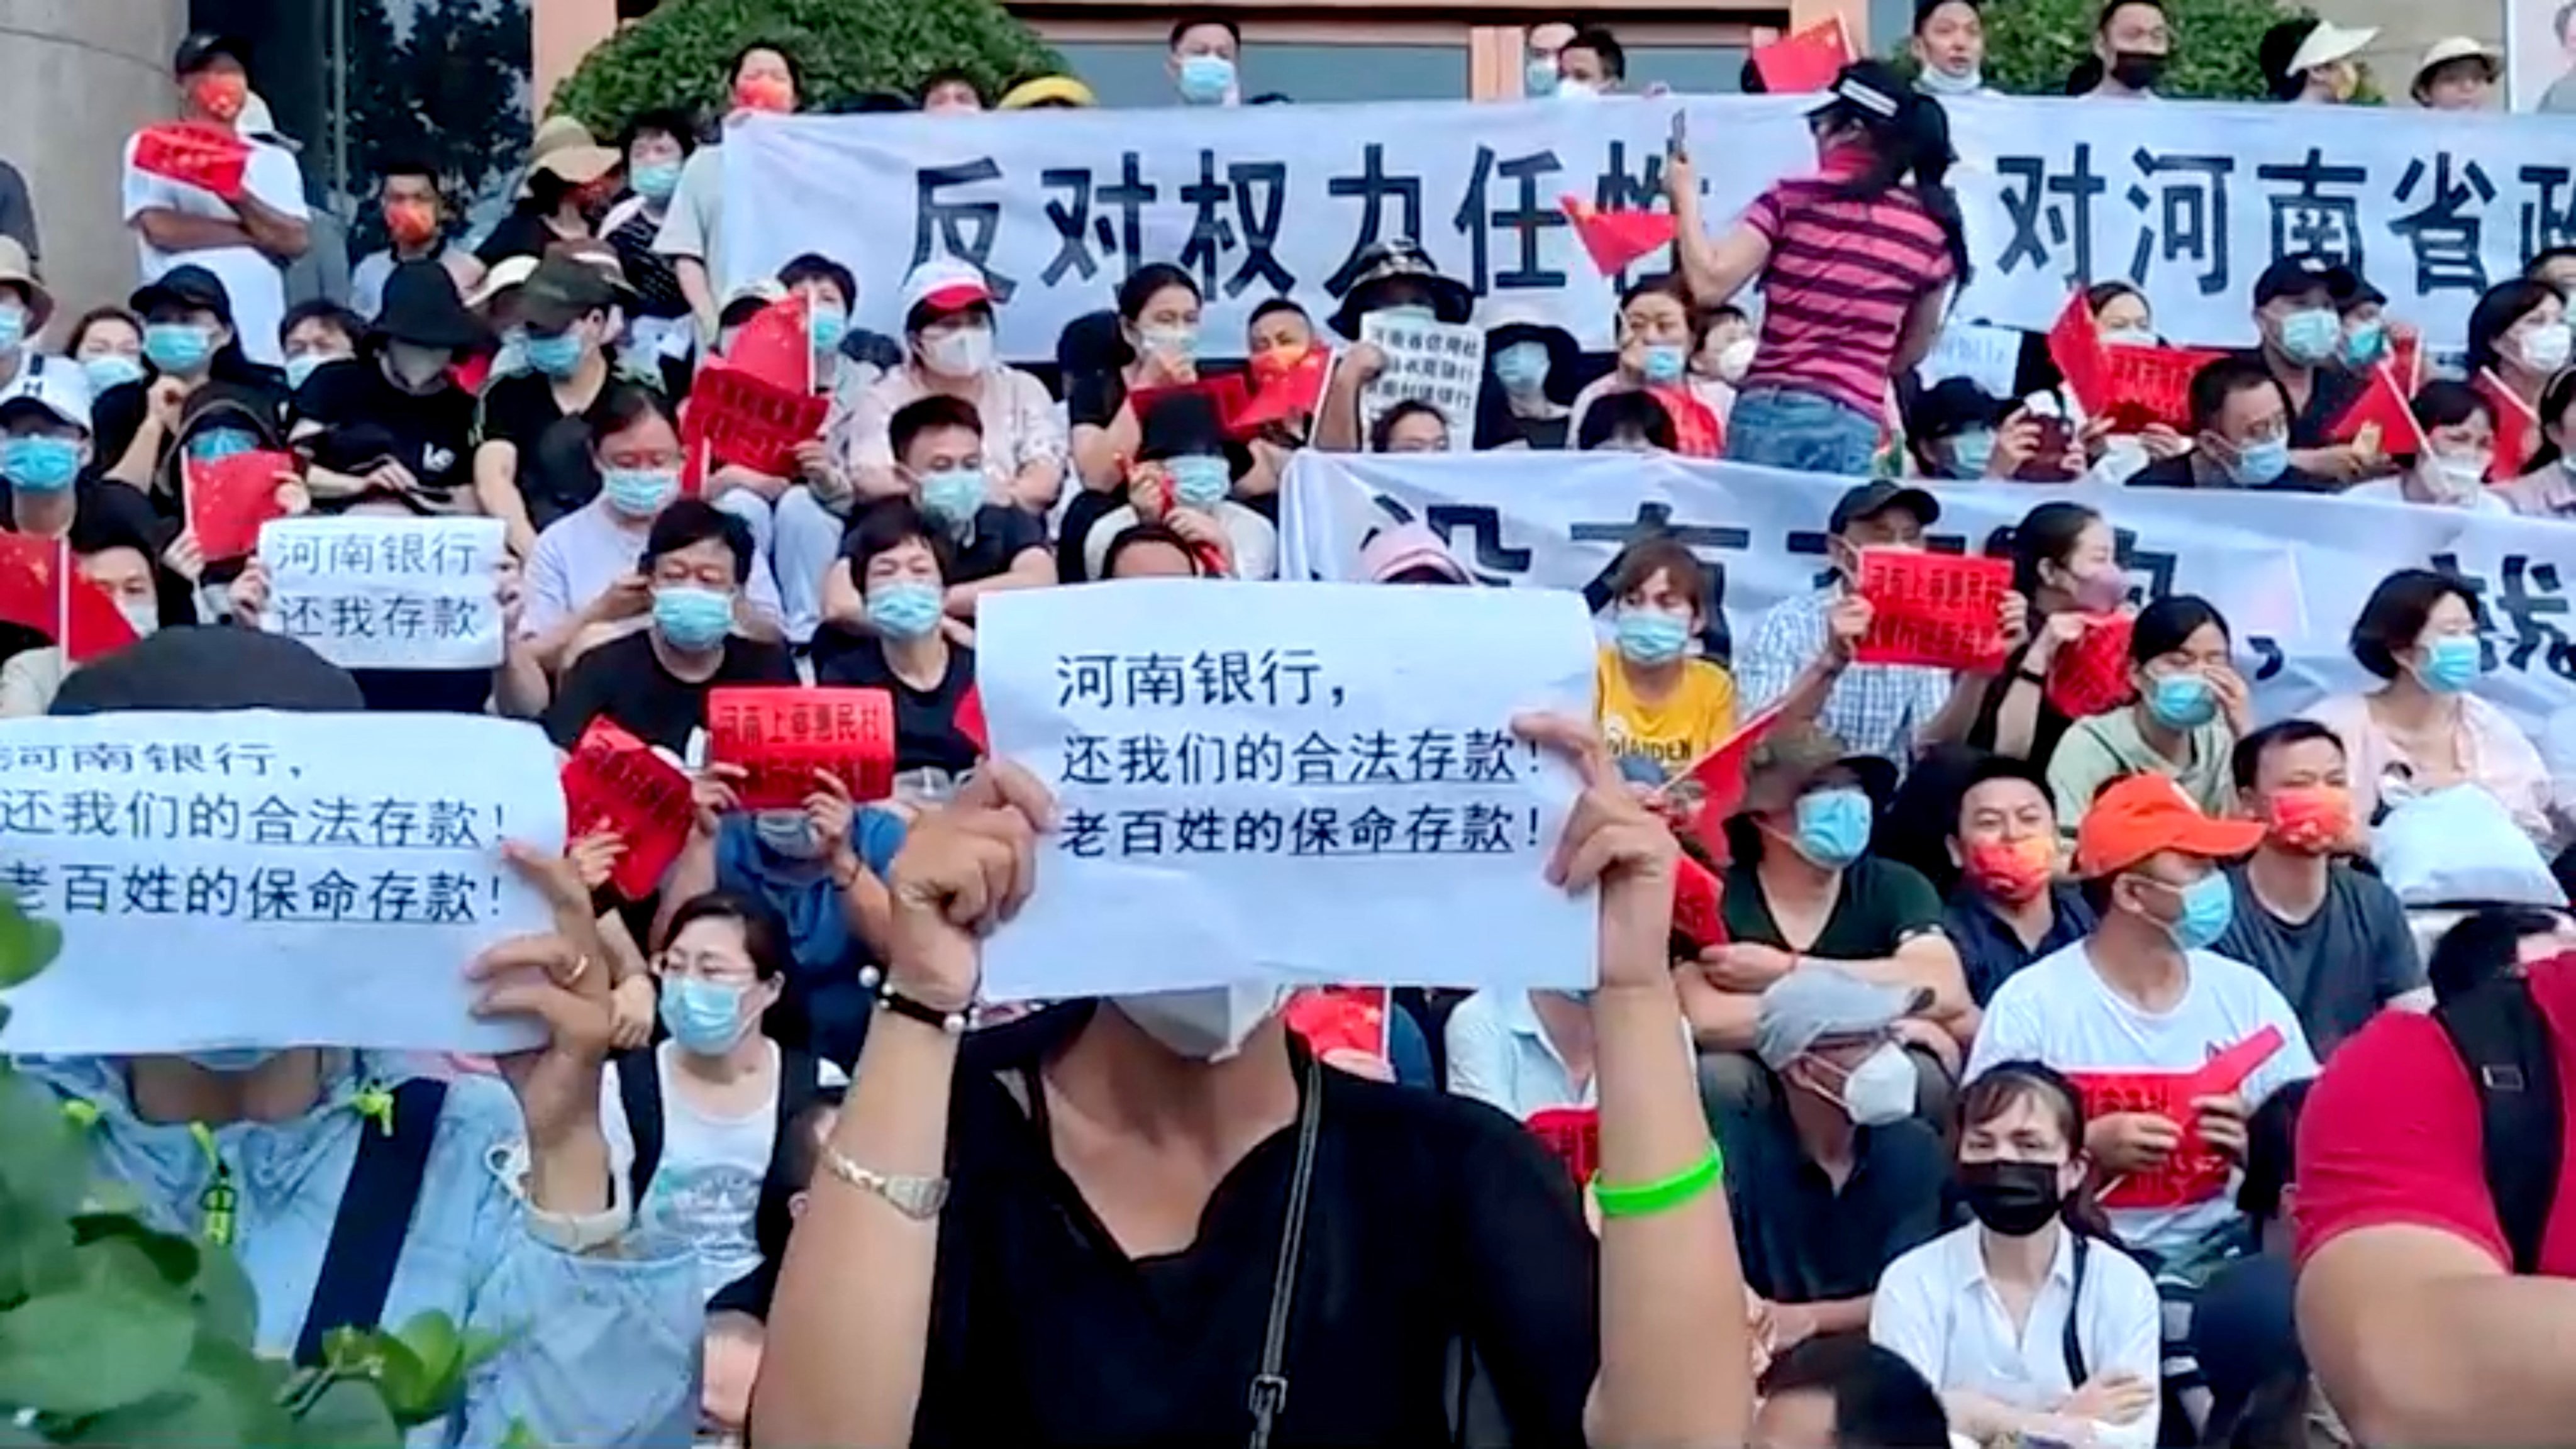 Demonstrators hold banners during a July 10 protest over the freezing of deposits by rural banks, outside a People’s Bank of China building in Zhengzhou, Henan province. Video screengrab via Reuters